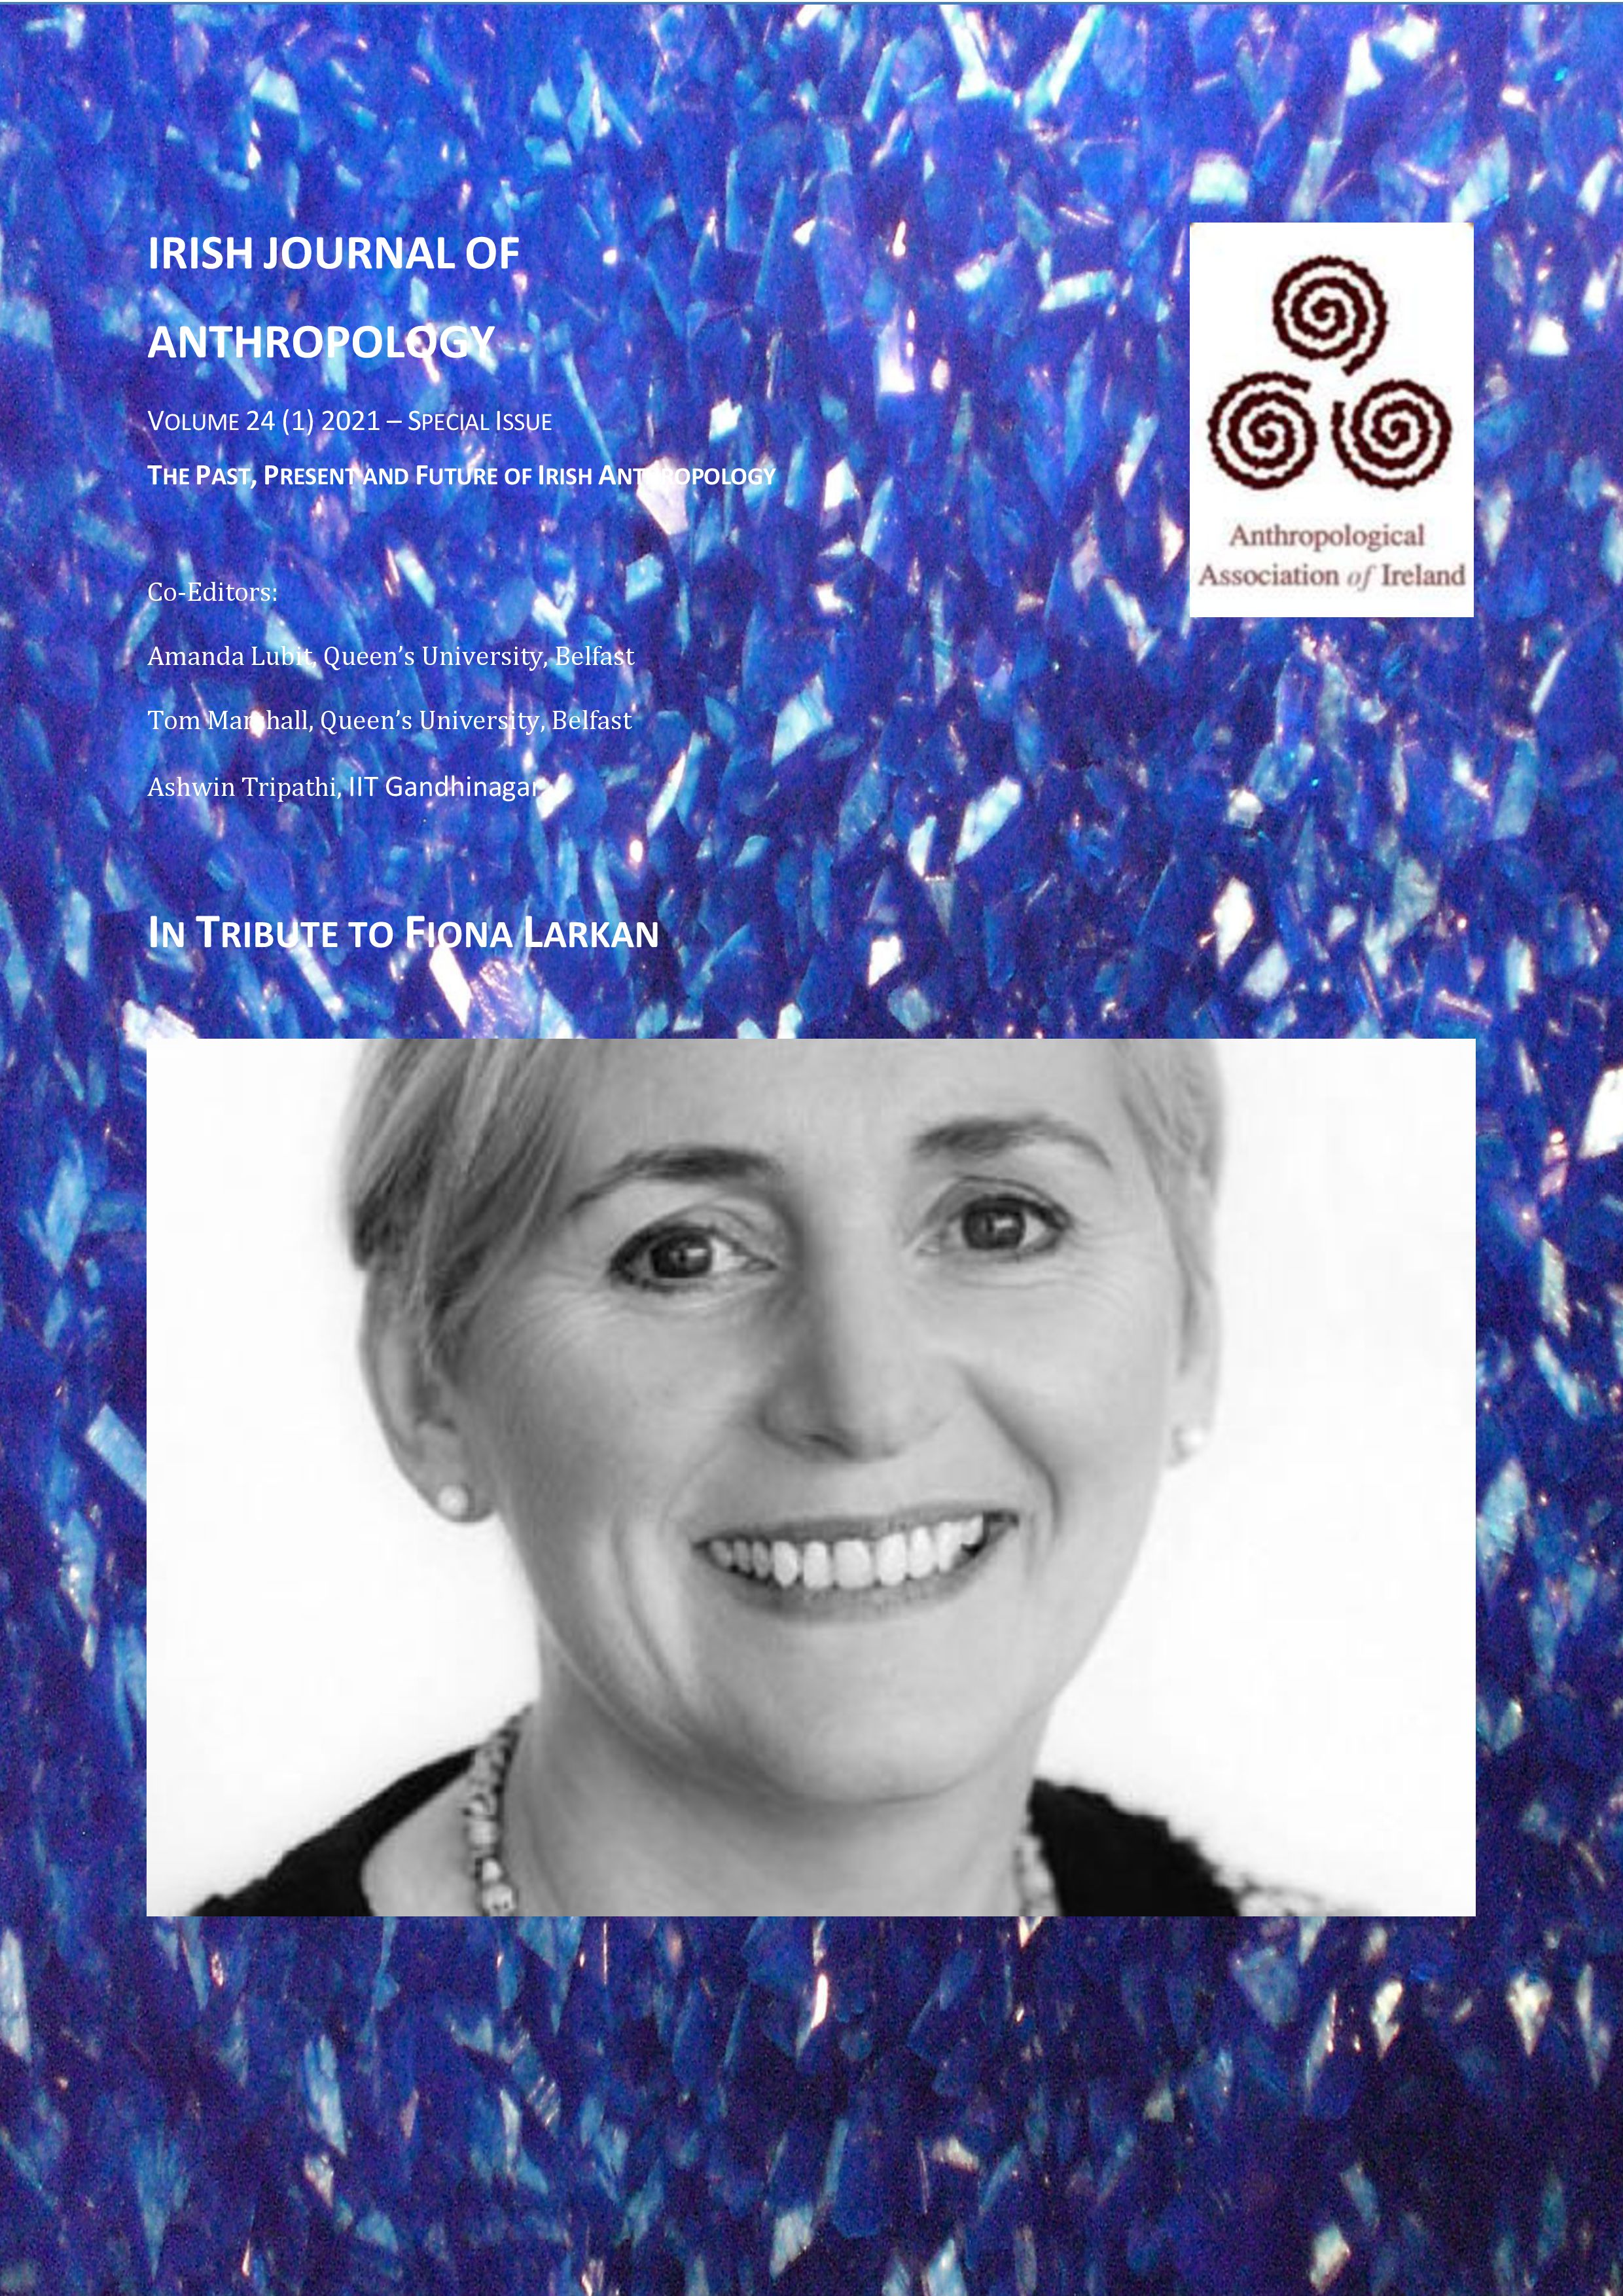 Cover of the issue; the cover image is a photograph of the late Fiona Larkan, to whom the issue is dedicated.